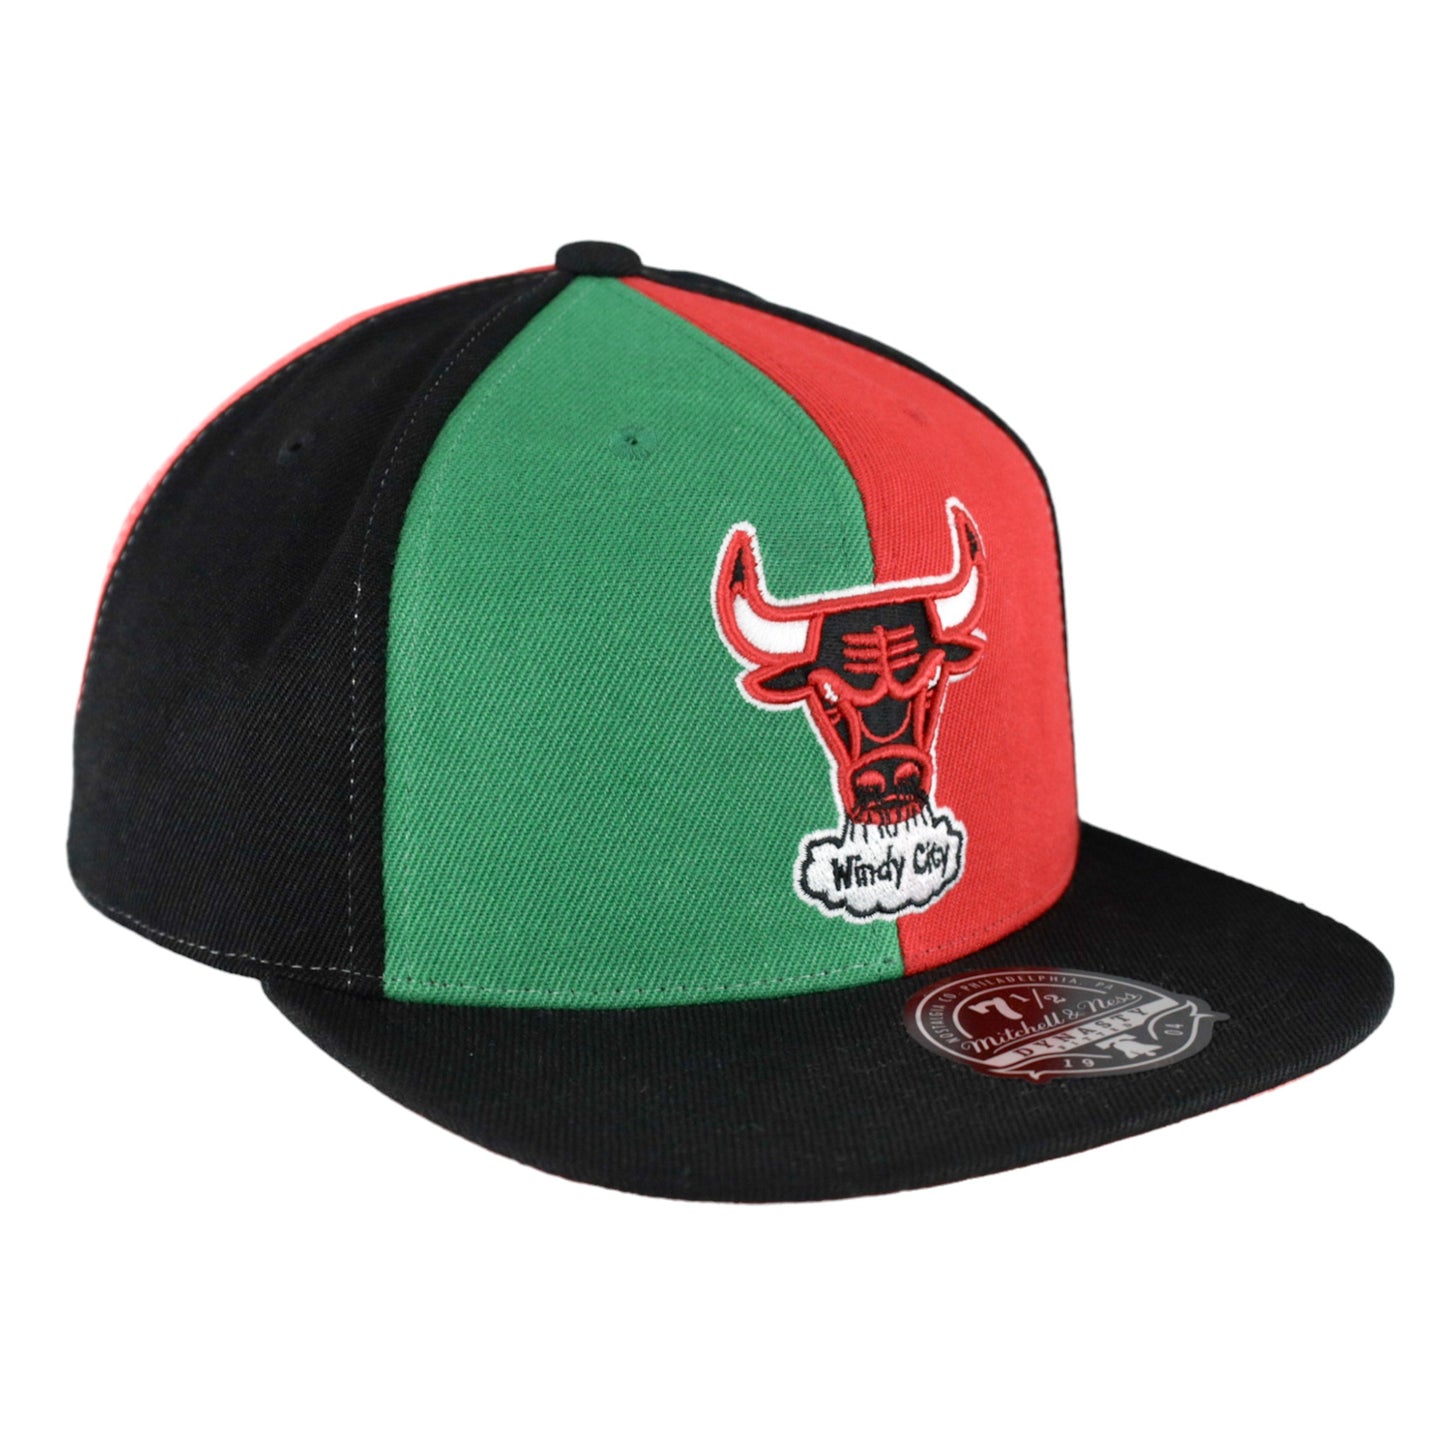 Chicago Bulls Black/Green/Red Tri-Color Mitchell & Ness Fitted Hat